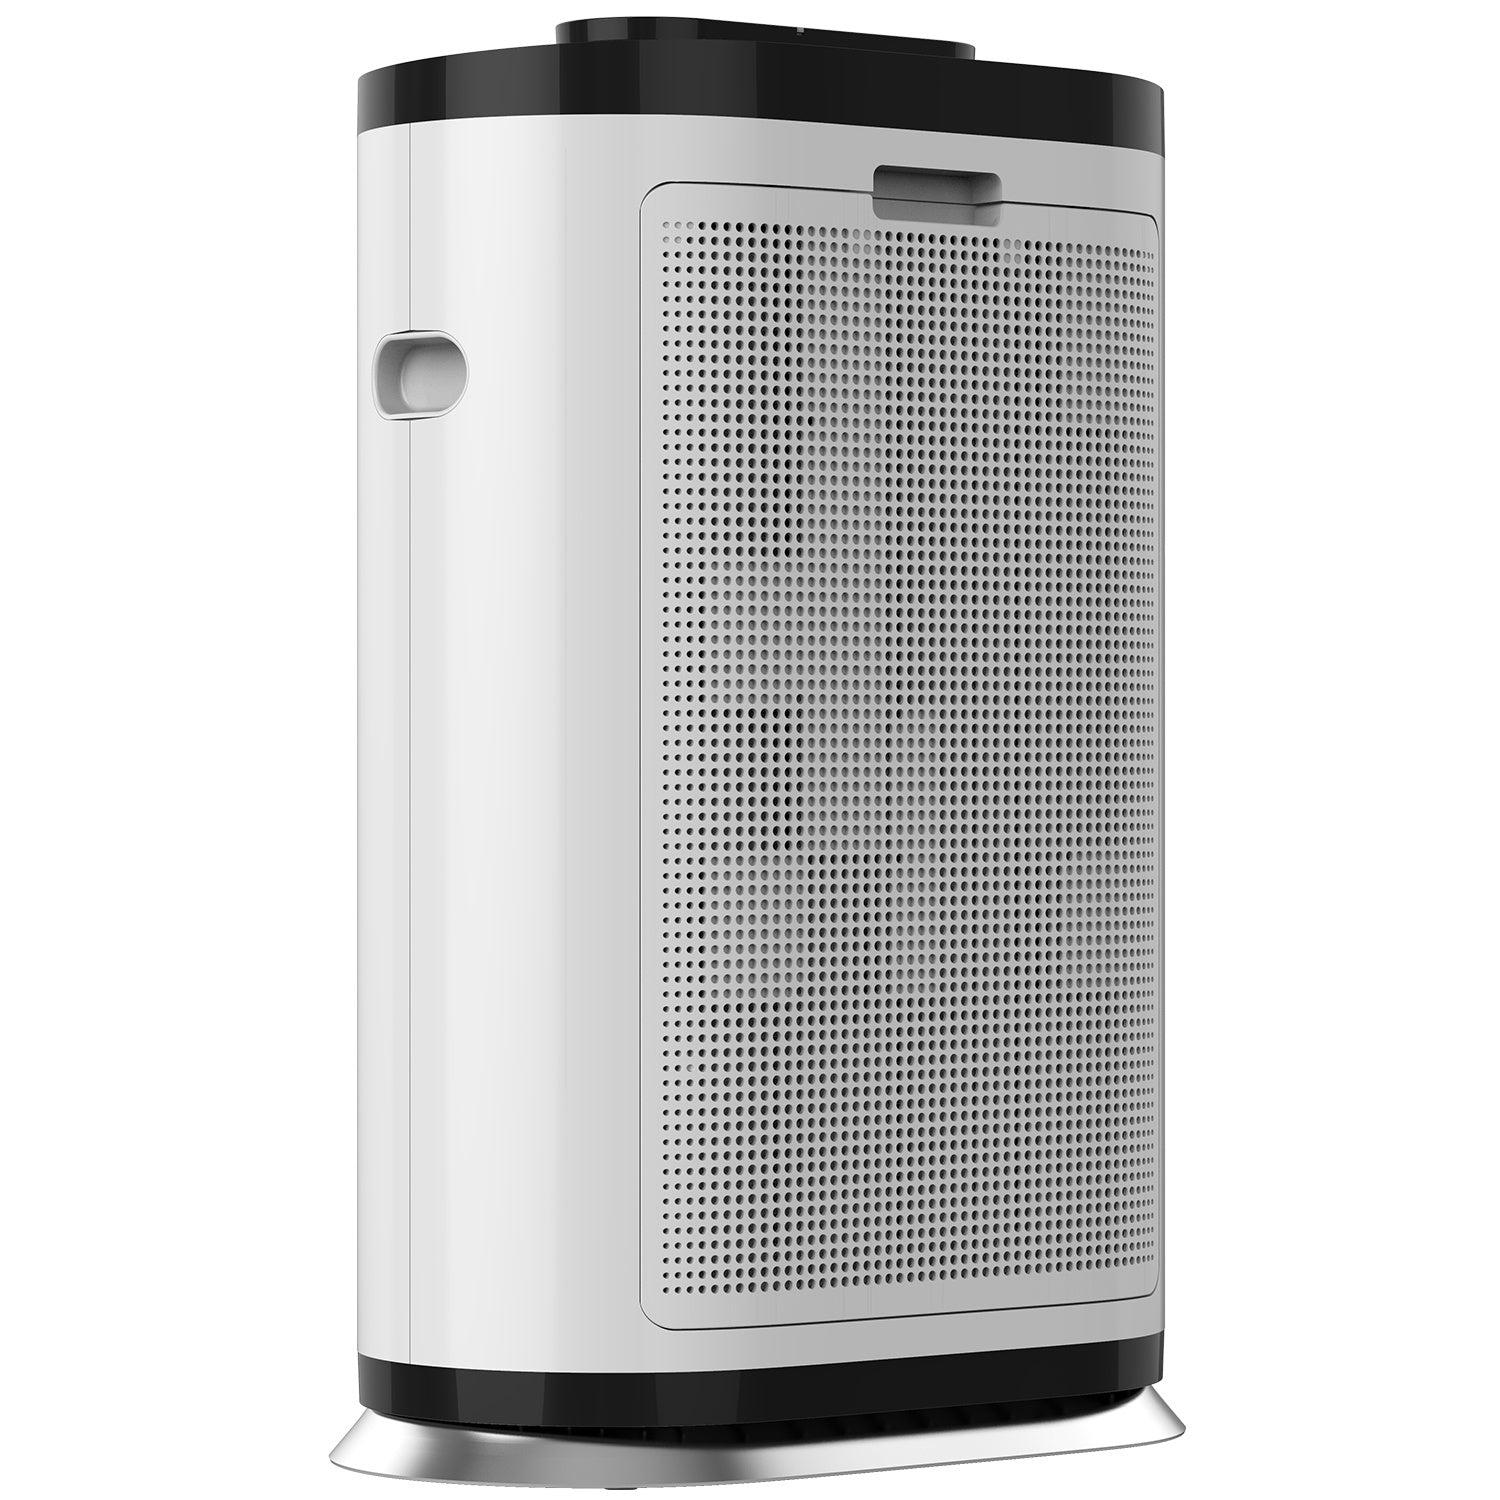 [Filter only, used with EX285857AAA]Large Room Air Purifier, H13 True HEAP , 99.99% Airborne Particle Removal, Captures Allergens, Dust, Pet Dander, Odors.